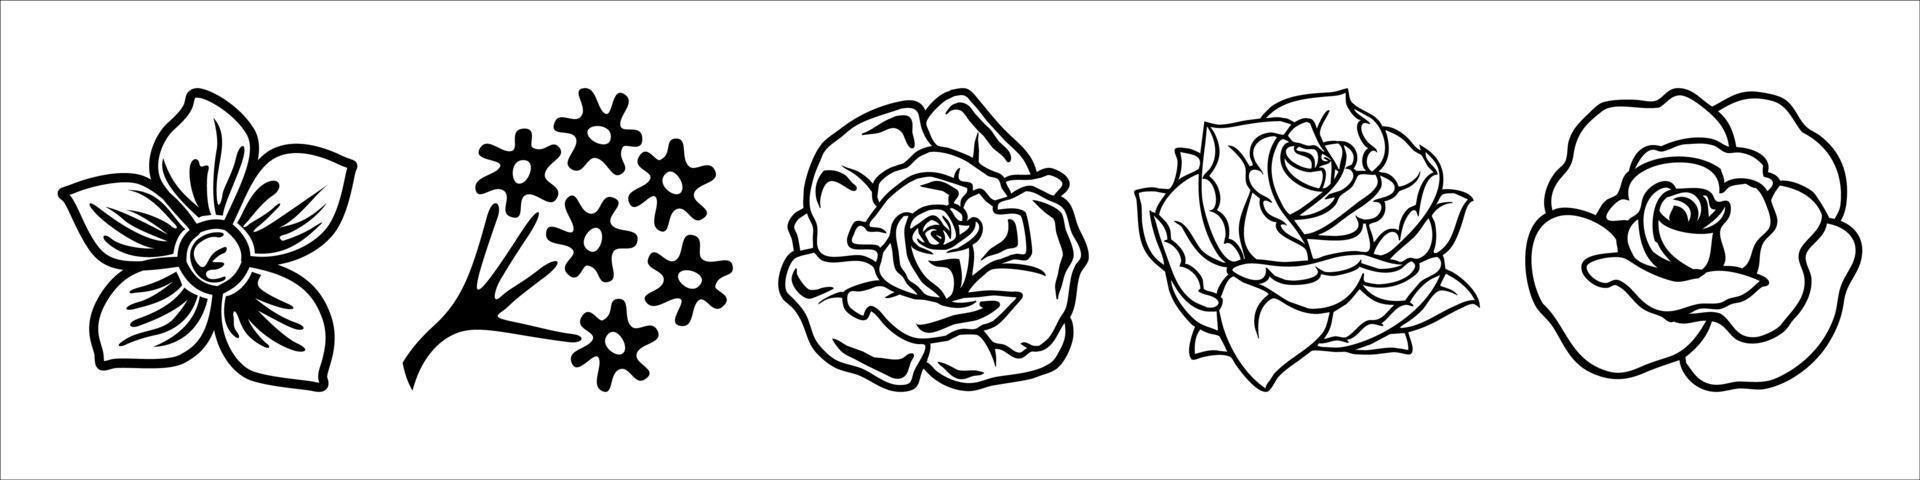 Hand drawn flowers vector